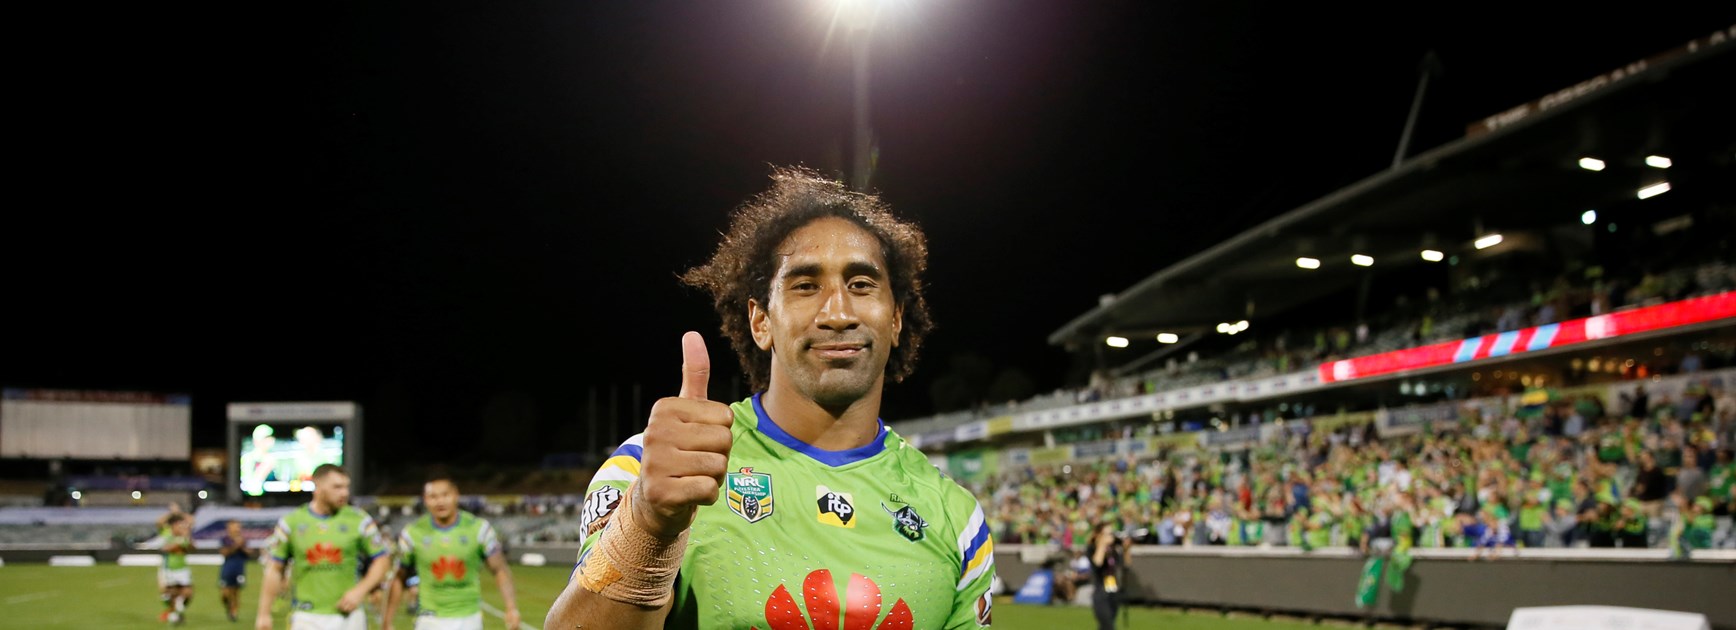 Soliola Re-Signs with the Raiders